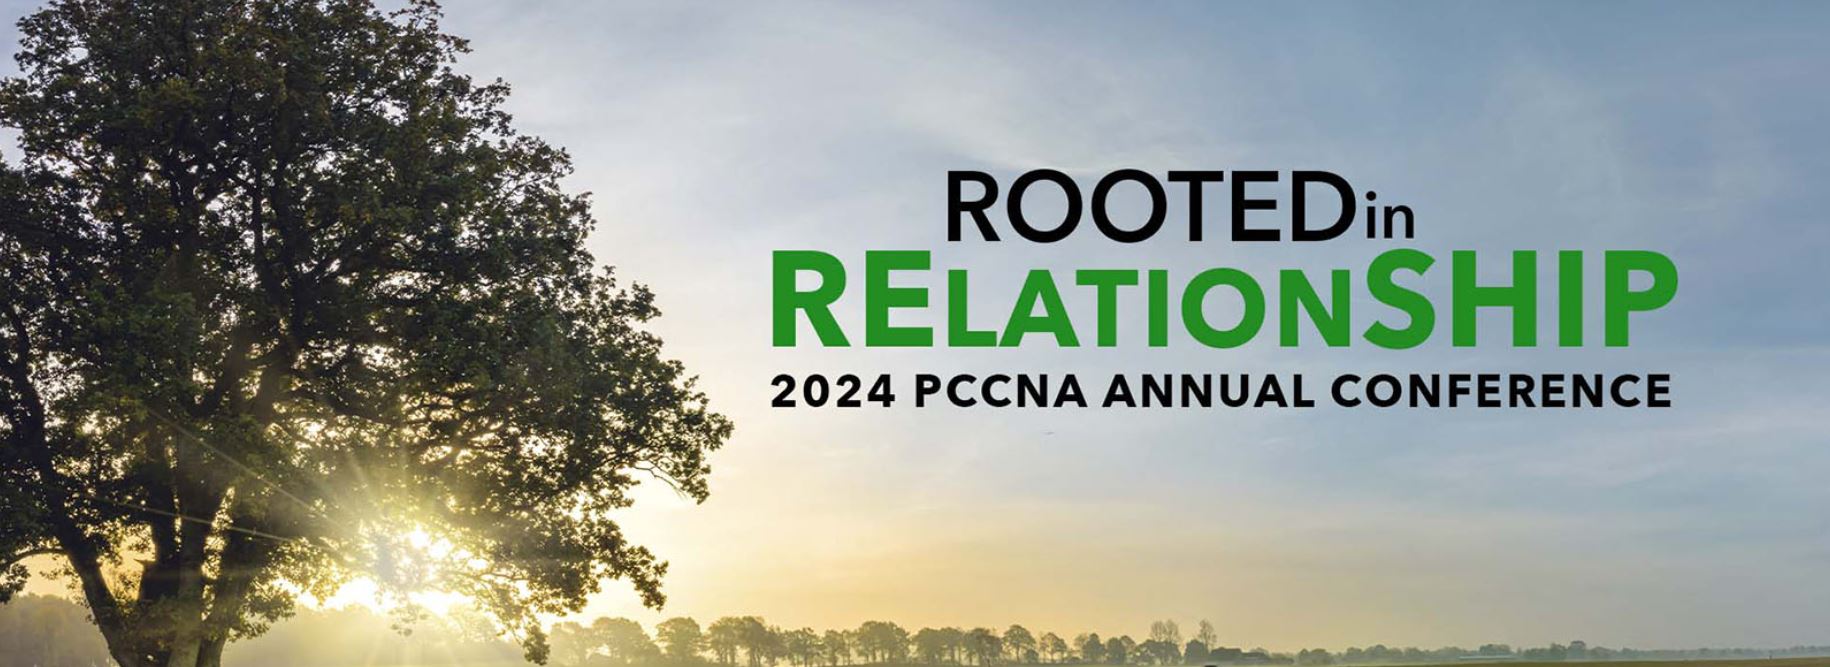 Rooted in Relationship - PCCNA Conference banner